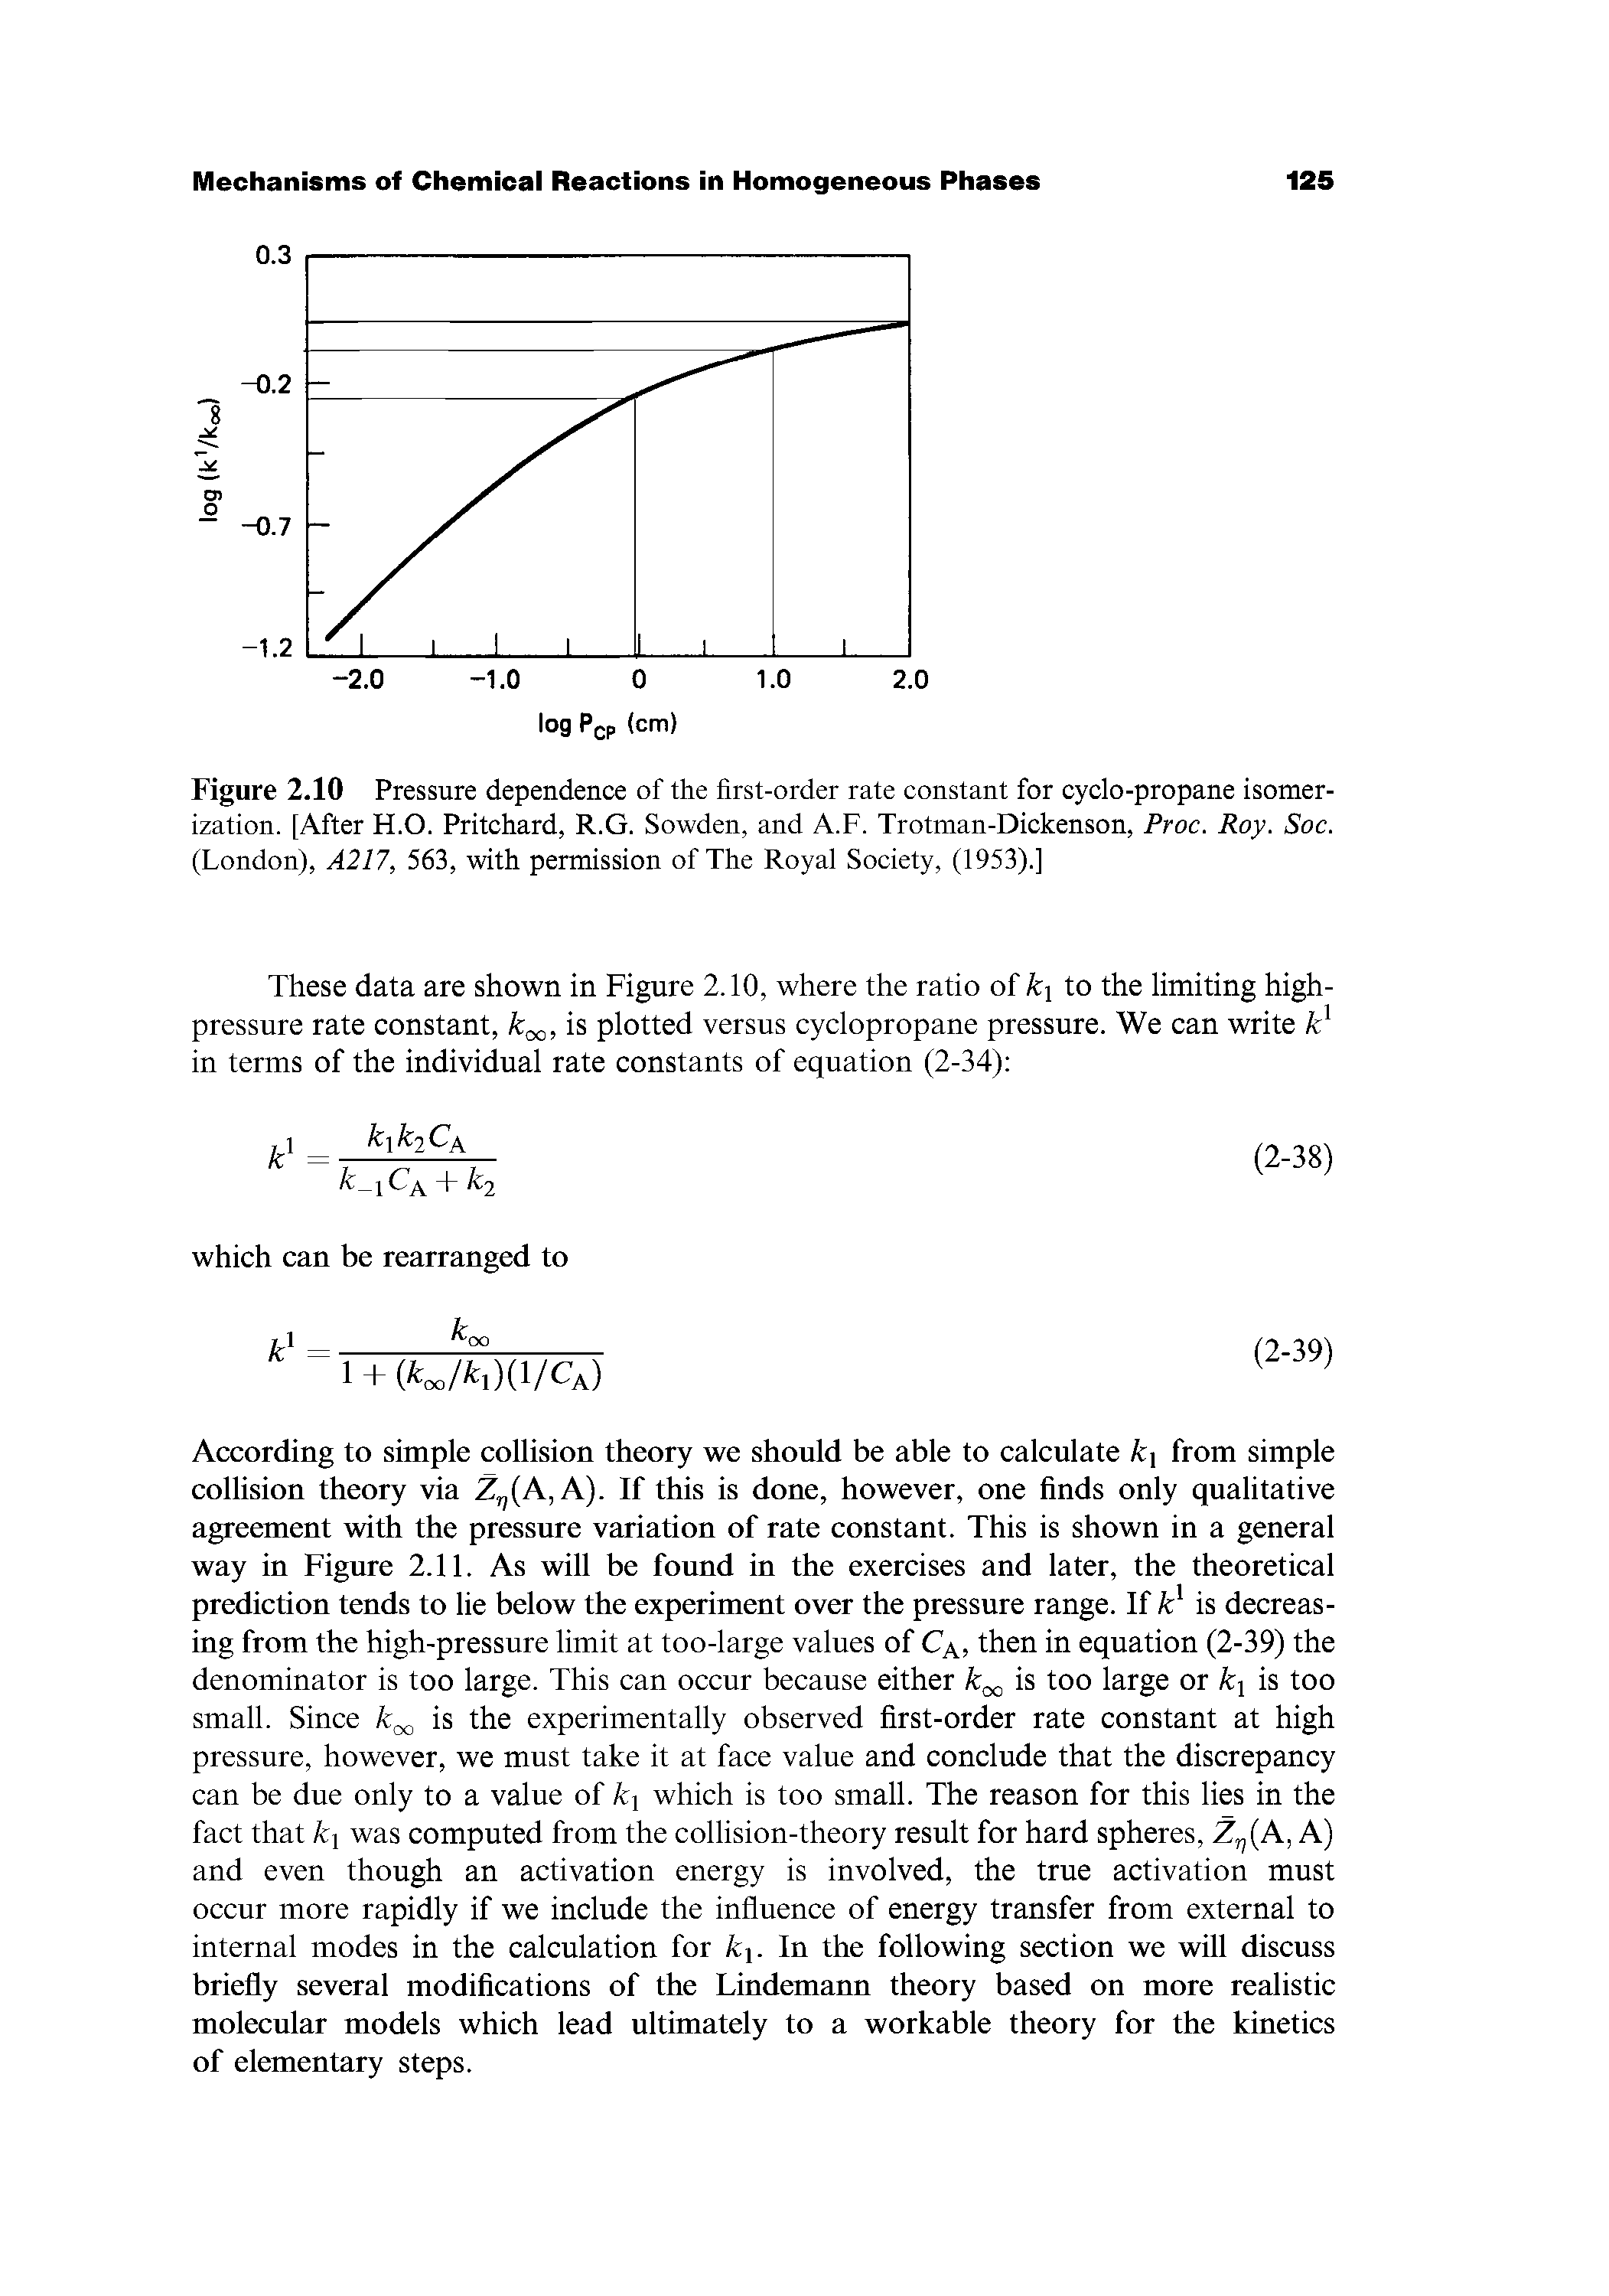 Figure 2.10 Pressure dependence of the first-order rate constant for cyclo-propane isomerization. [After H.O. Pritchard, R.G. Sowden, and A.F. Trotman-Dickenson, Proc. Roy. Soc. (London), A217, 563, with permission of The Royal Society, (1953).]...